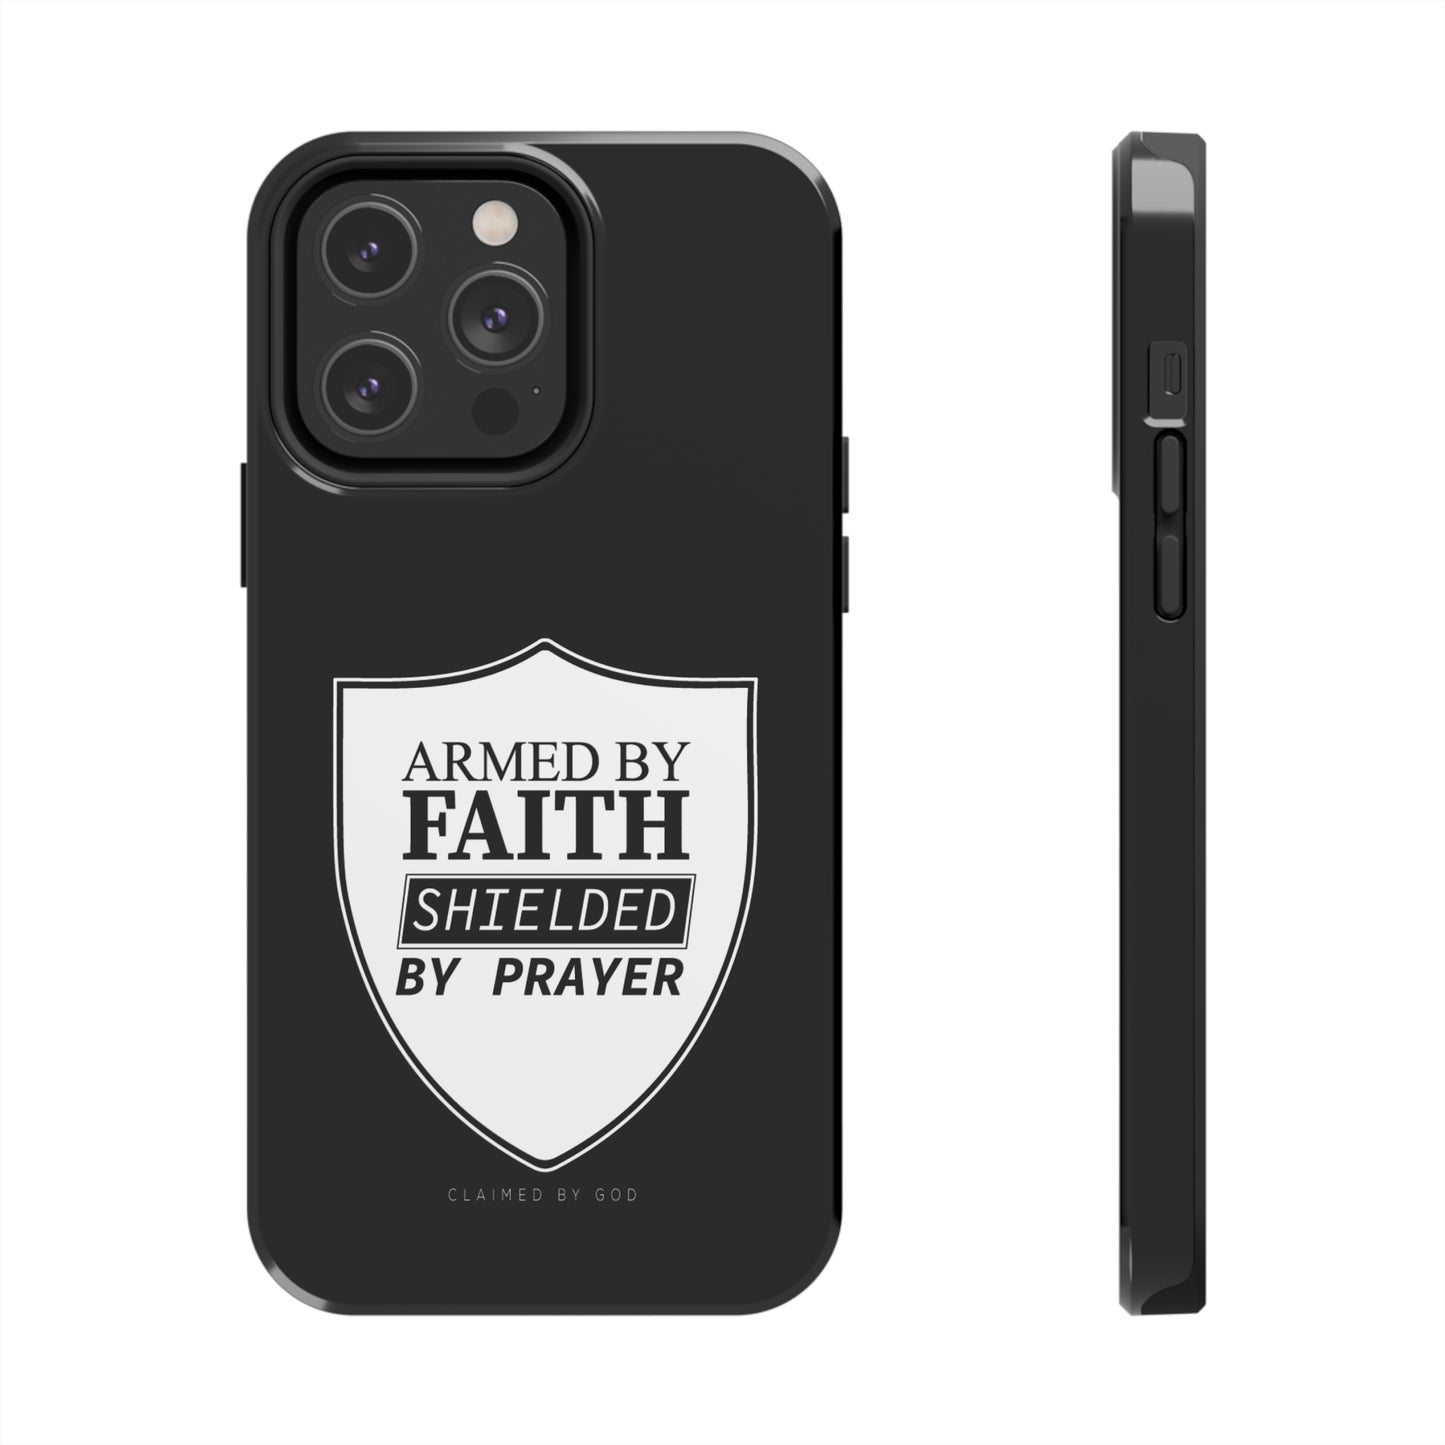 Armed By Faith Shielded By Prayer Tough Phone Cases, Case-Mate